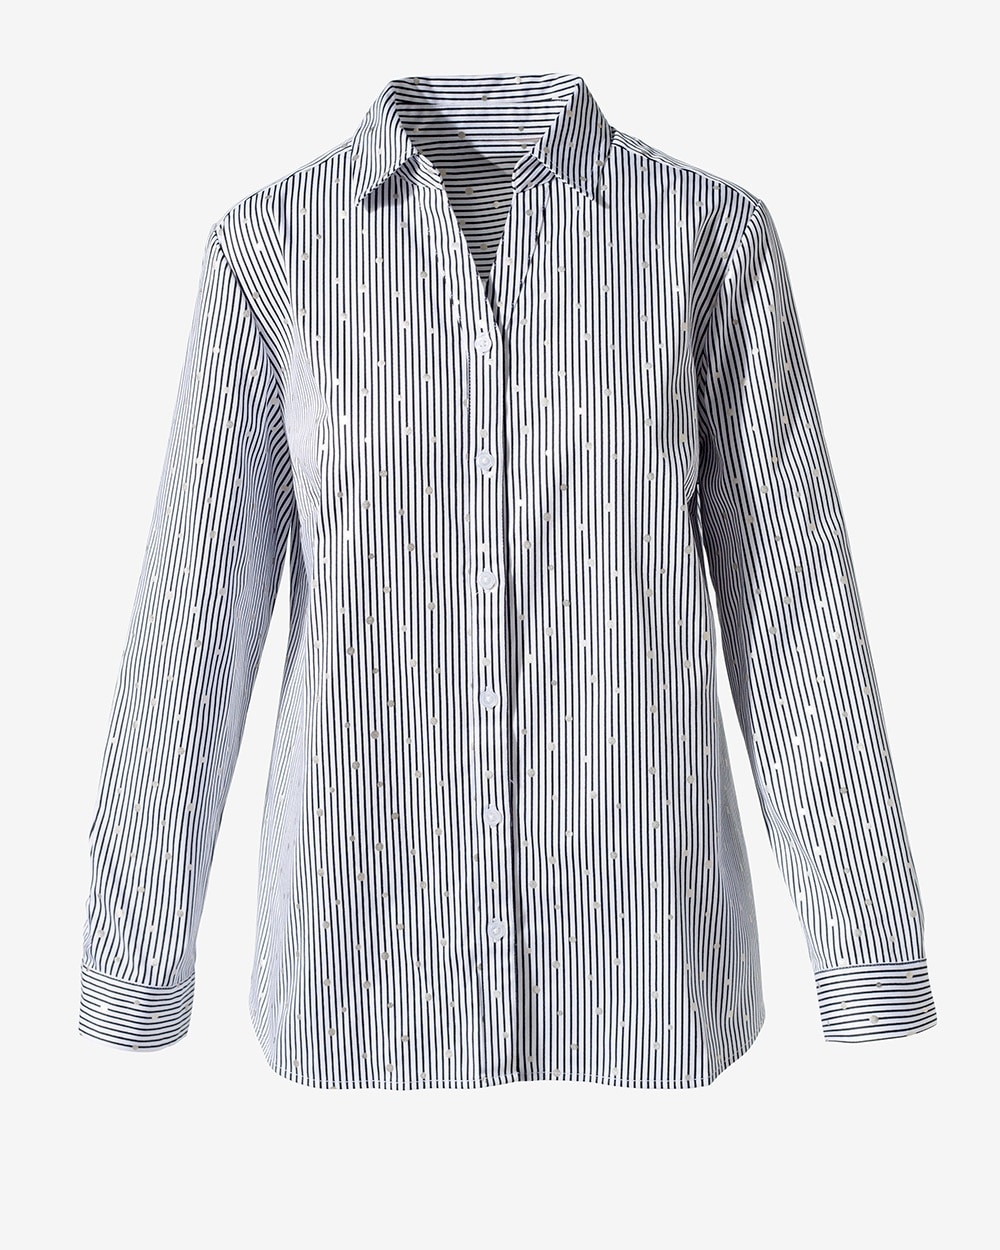 Dots and Stripes Long-Sleeve Button-Up Top